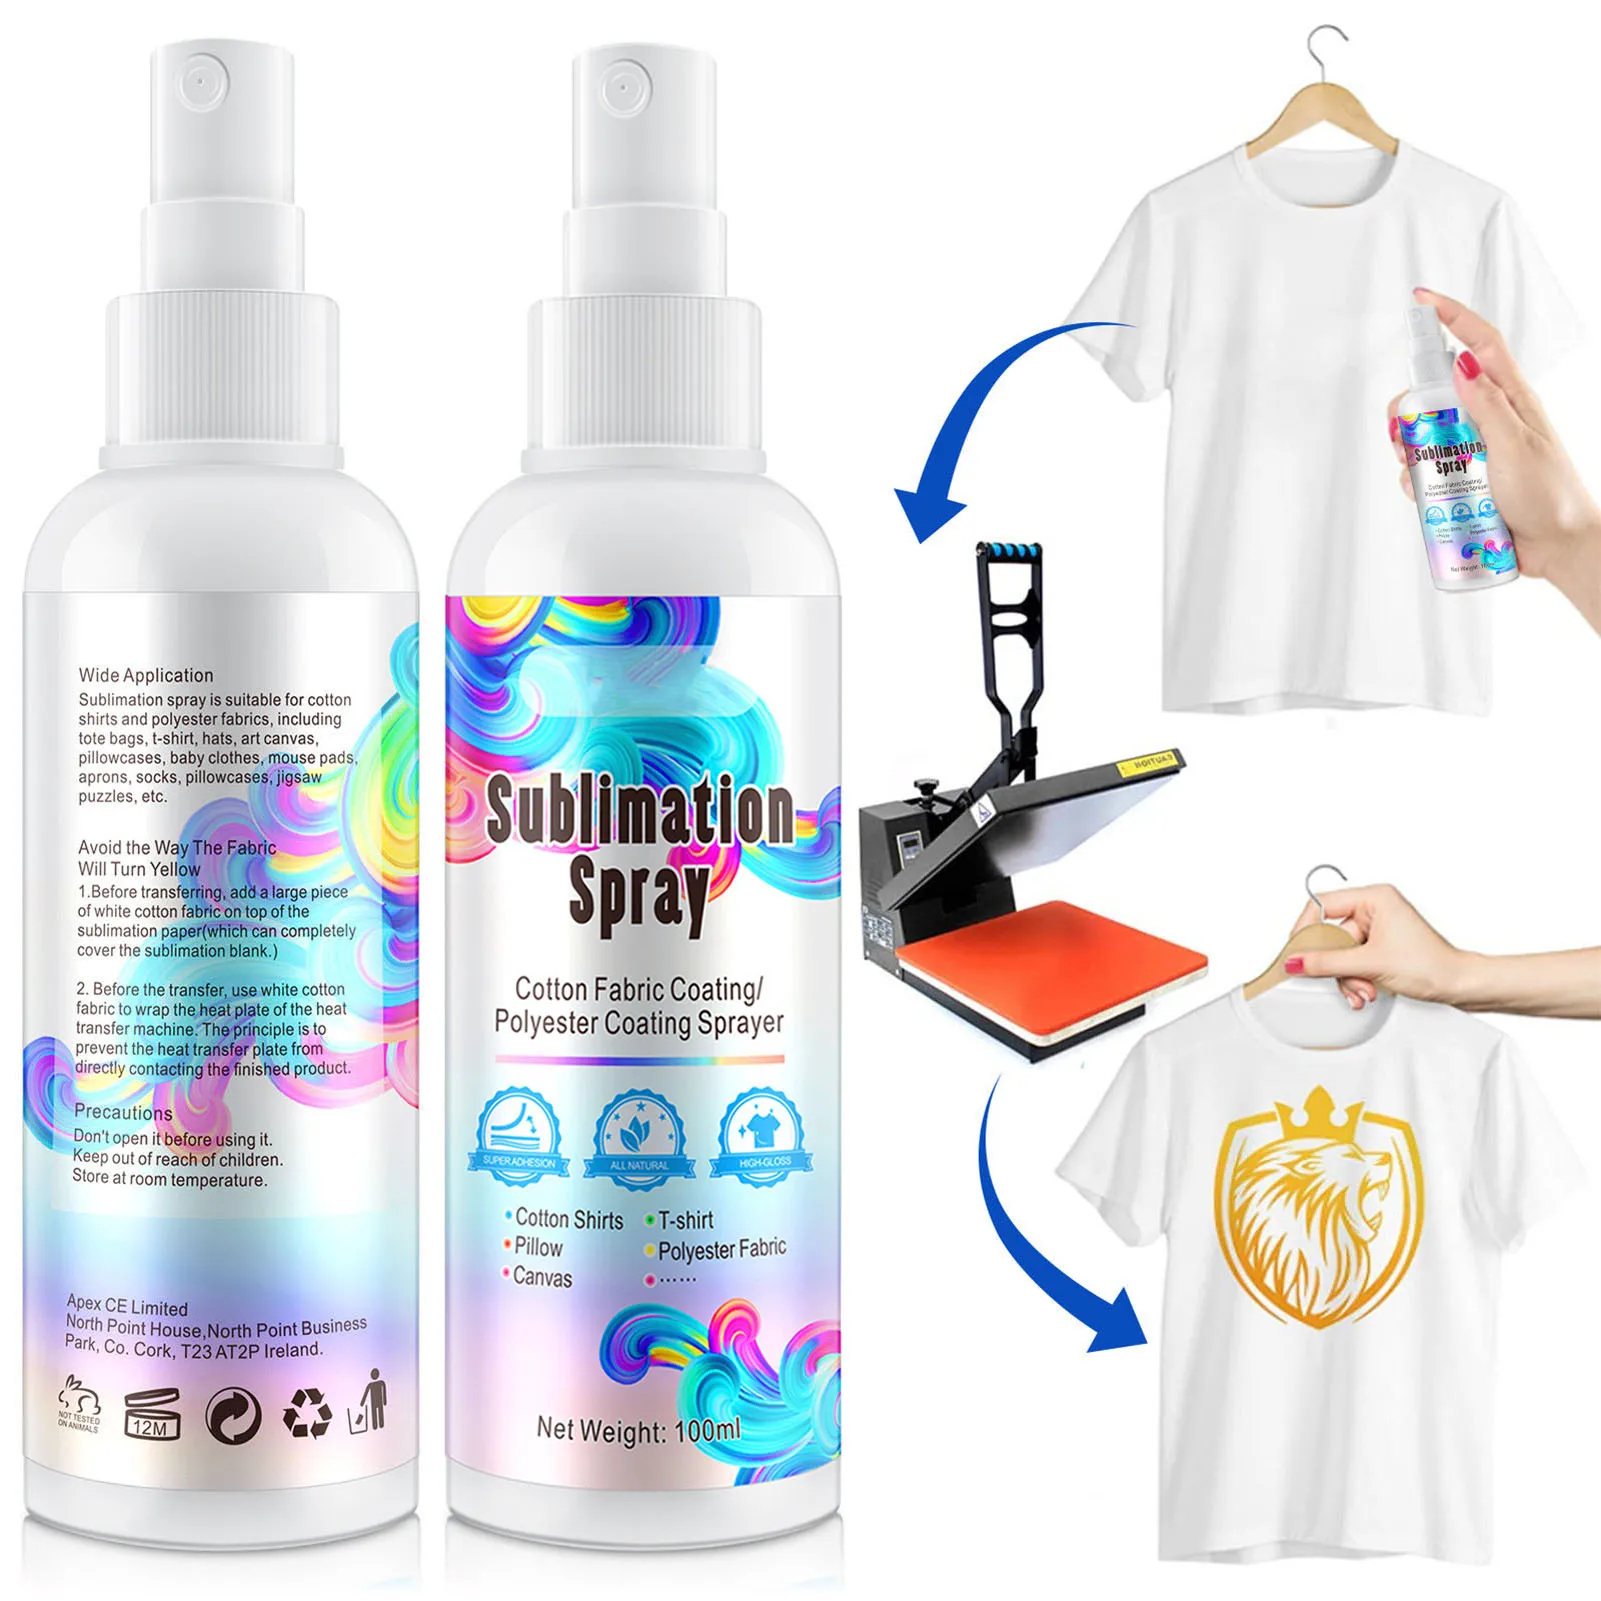 Sublimation Spray Sublimation Coating For Cotton Shirts Spray All Fabrics  Including Polyester Carton Canvas Quick Drying And Super Adhesion High  Gloss